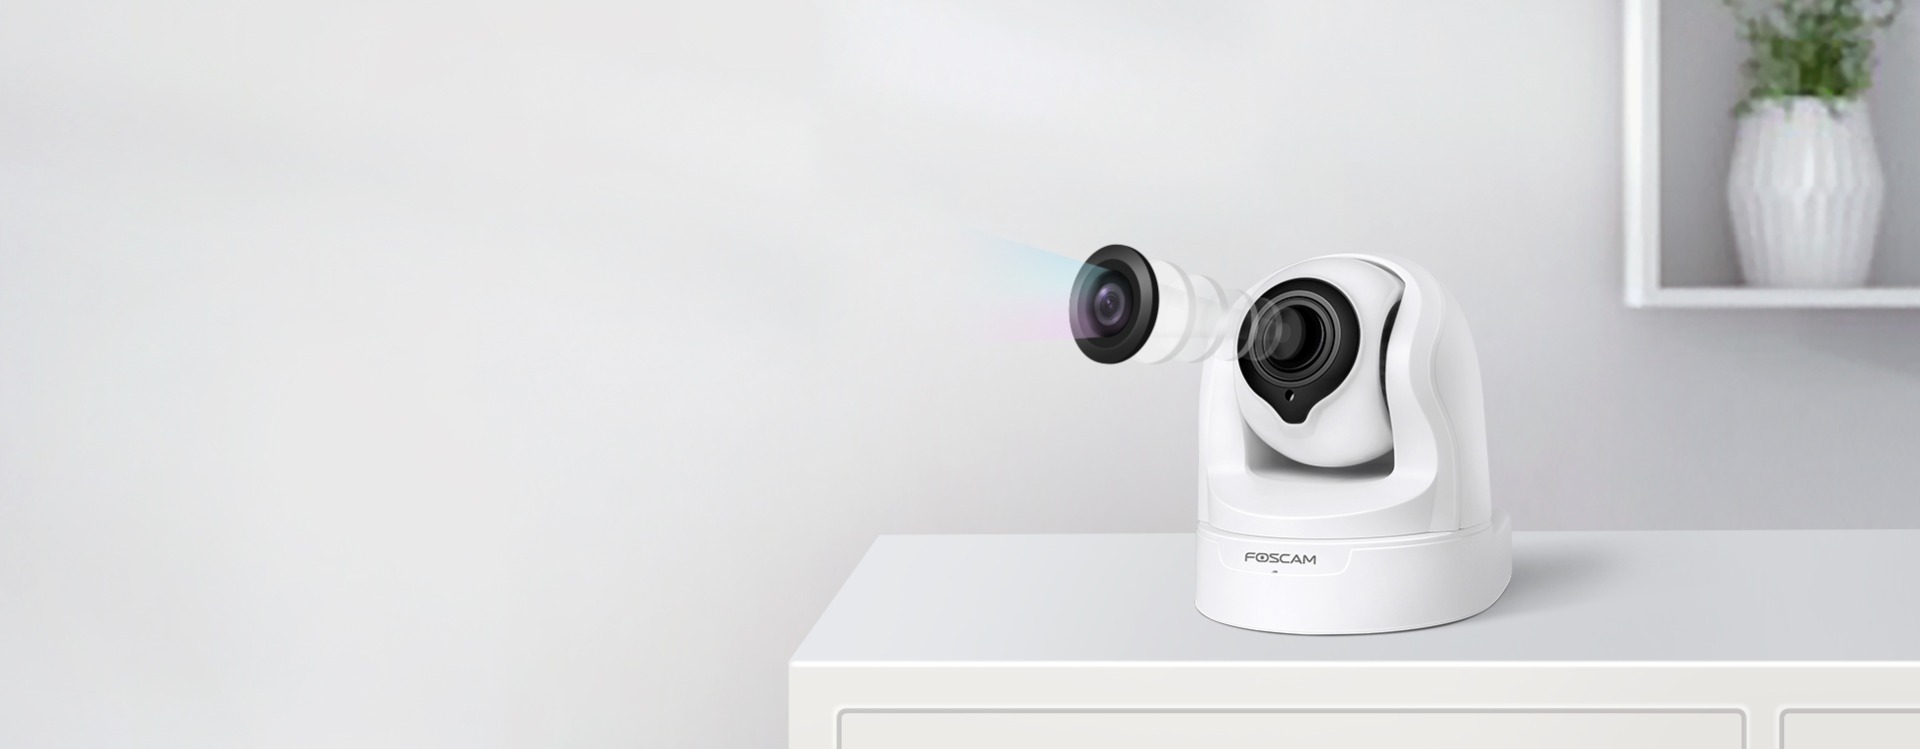 FHD 4x Zoom Security Camera